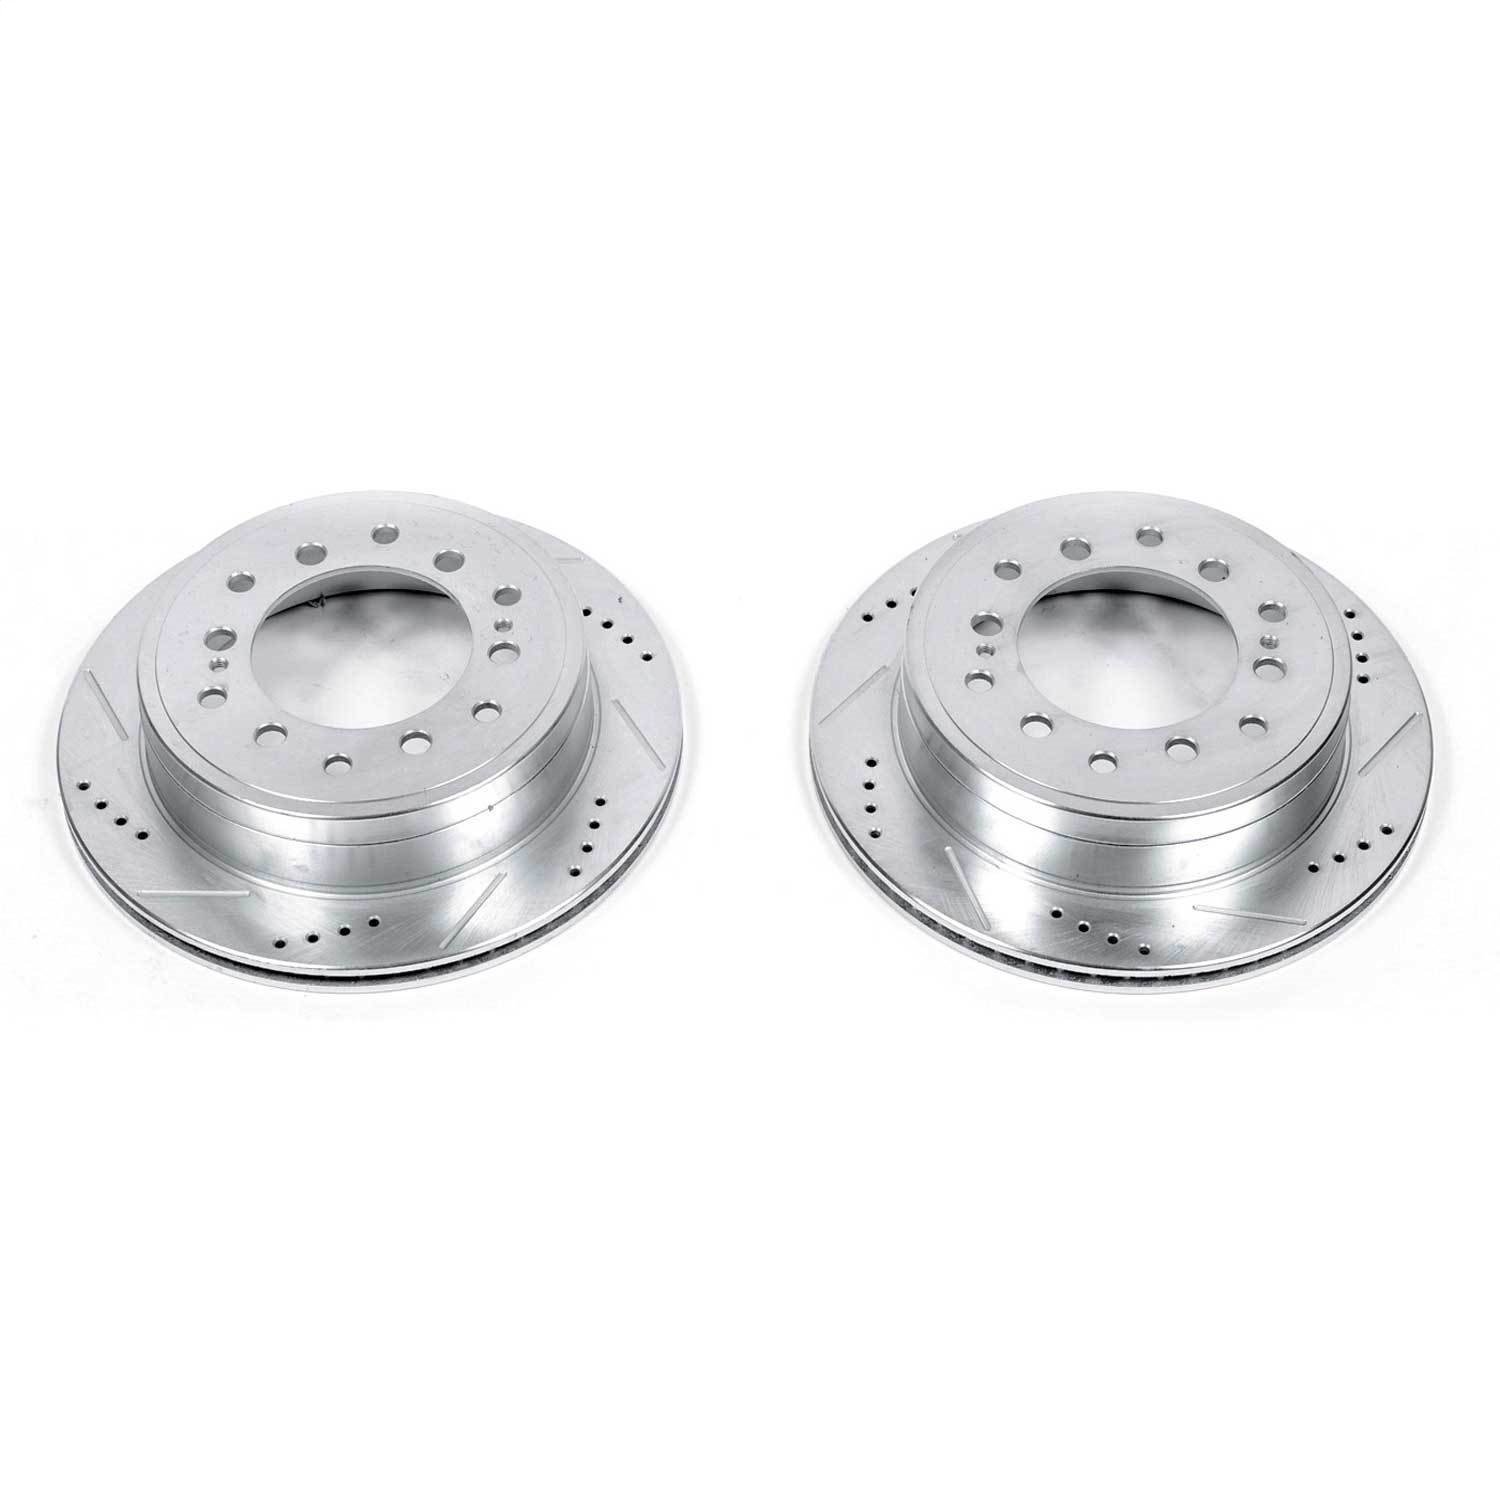 Cross-Drilled and Slotted Brake Rotors Rear Highest Quality G3000 Grade Casting Blanks Zinc-Plated f